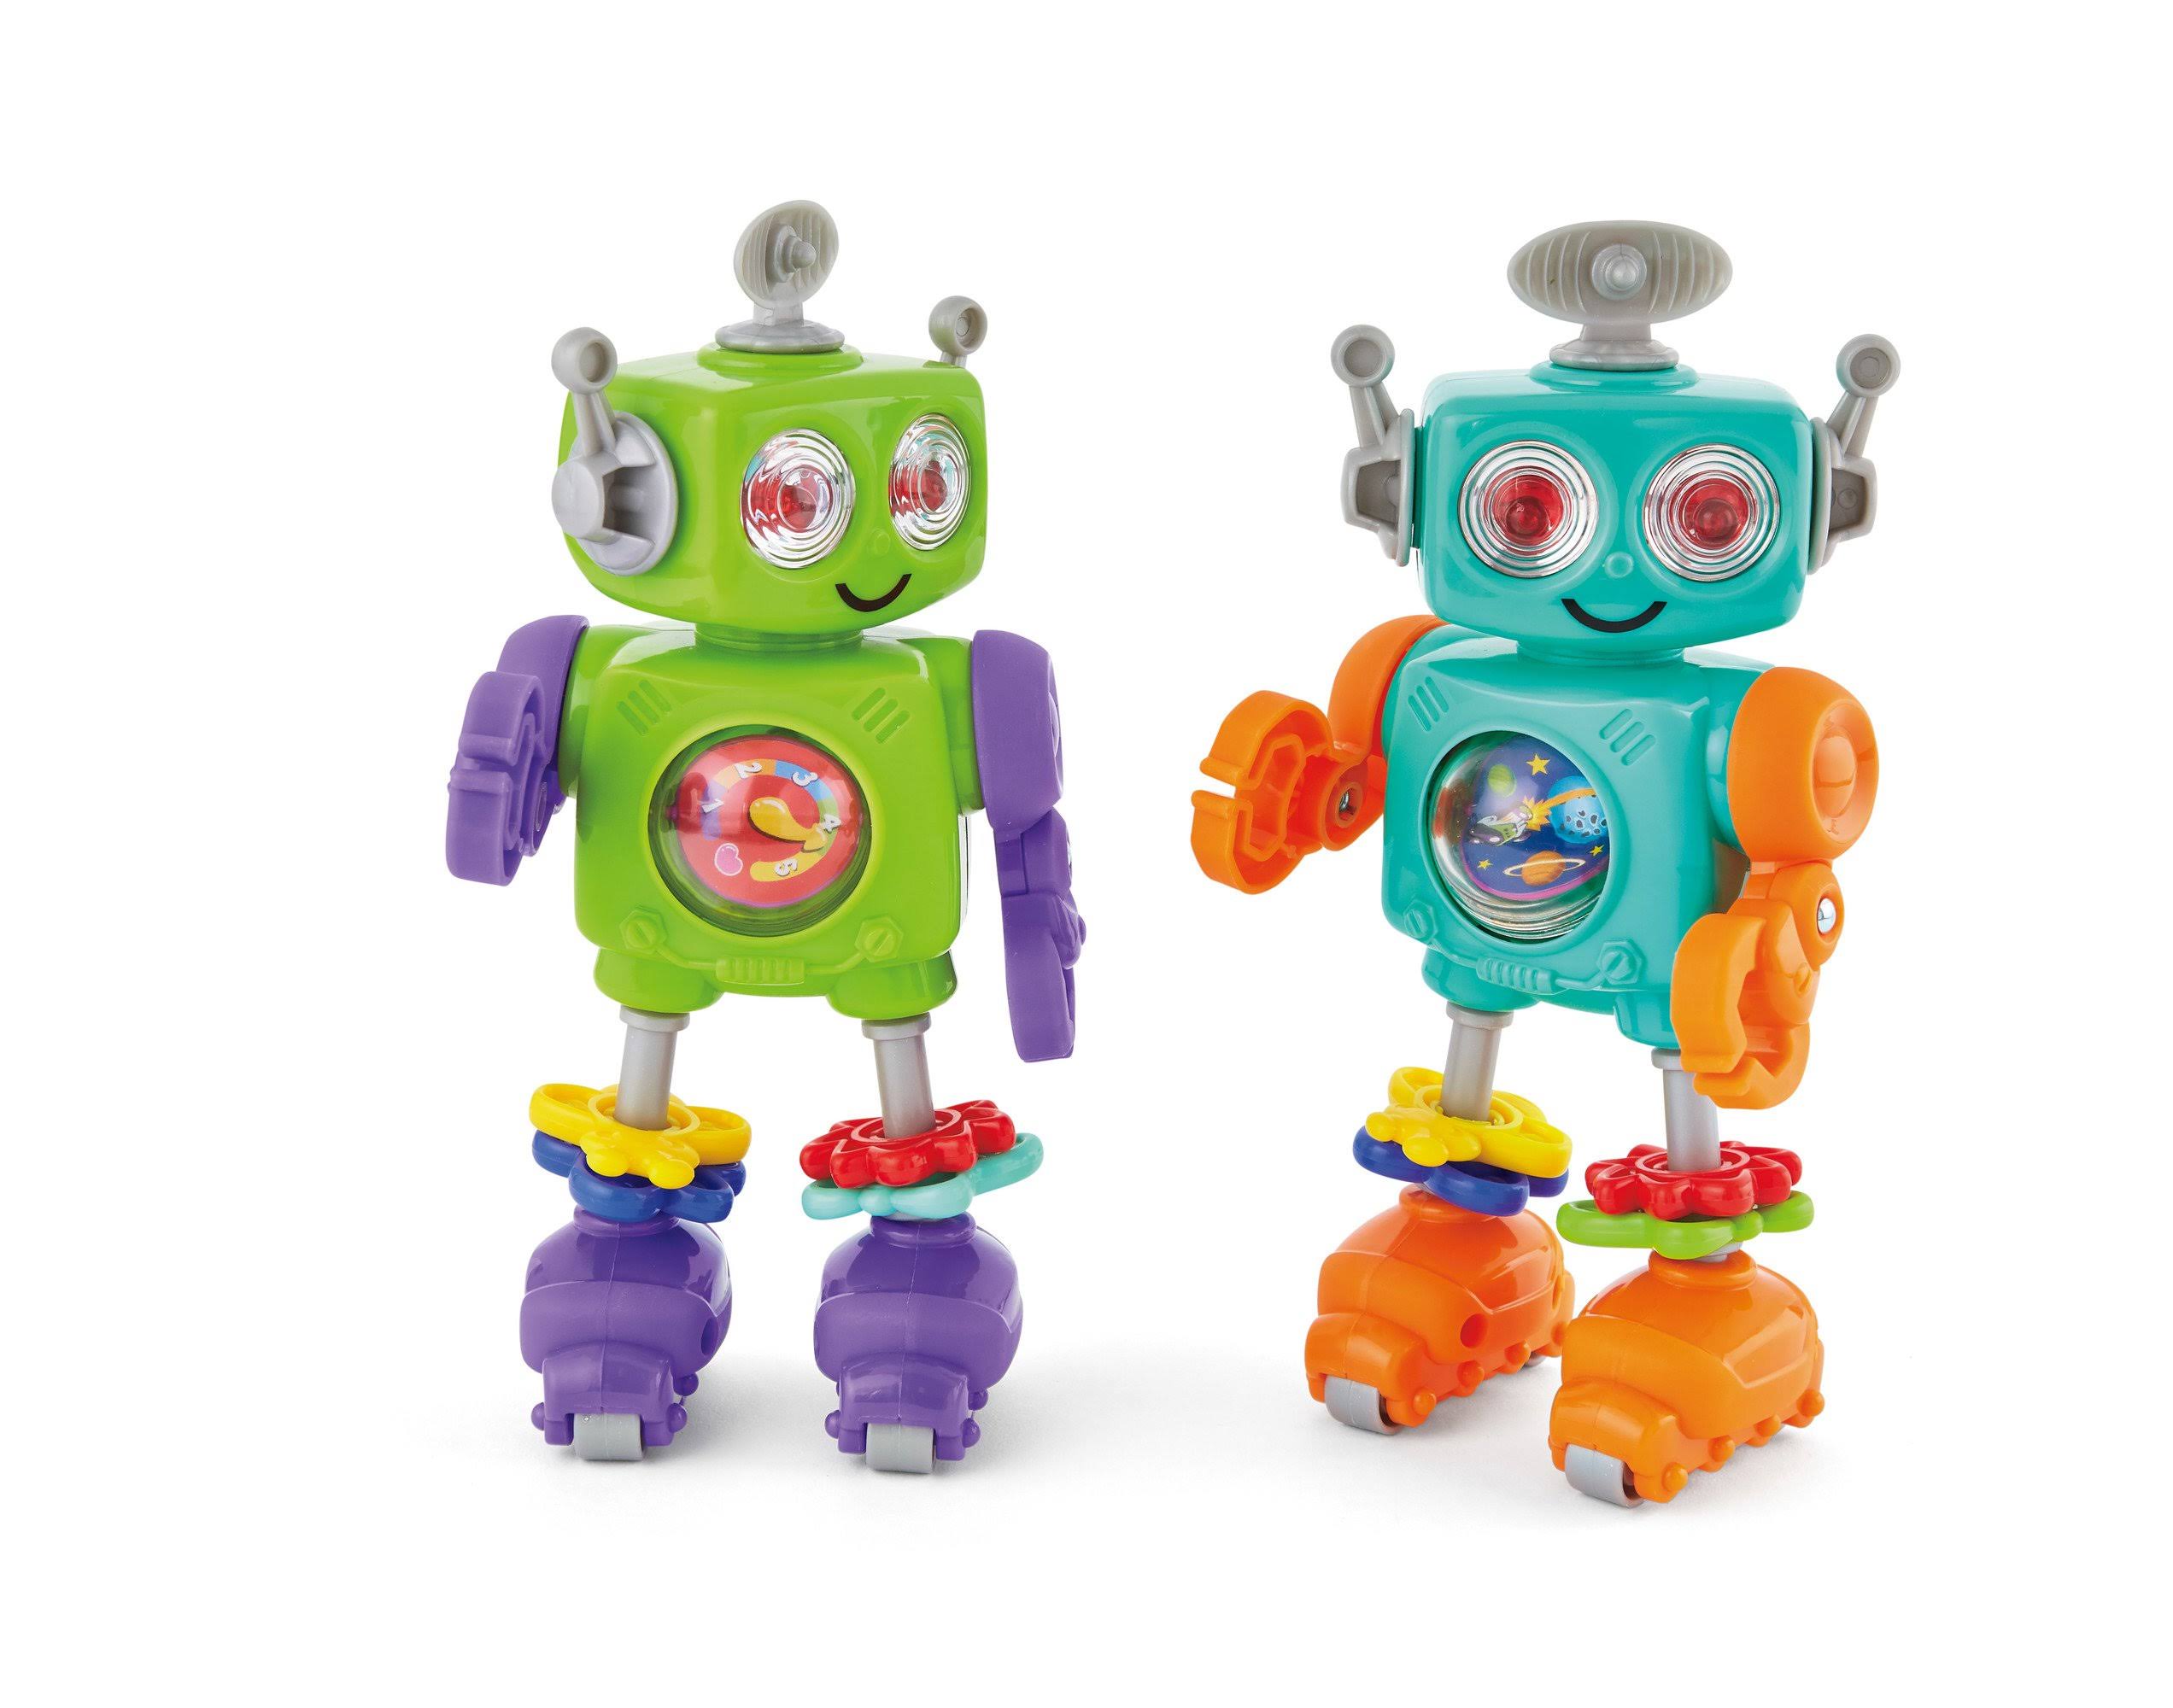 Kidoozie - My First Robot, Colors May Vary